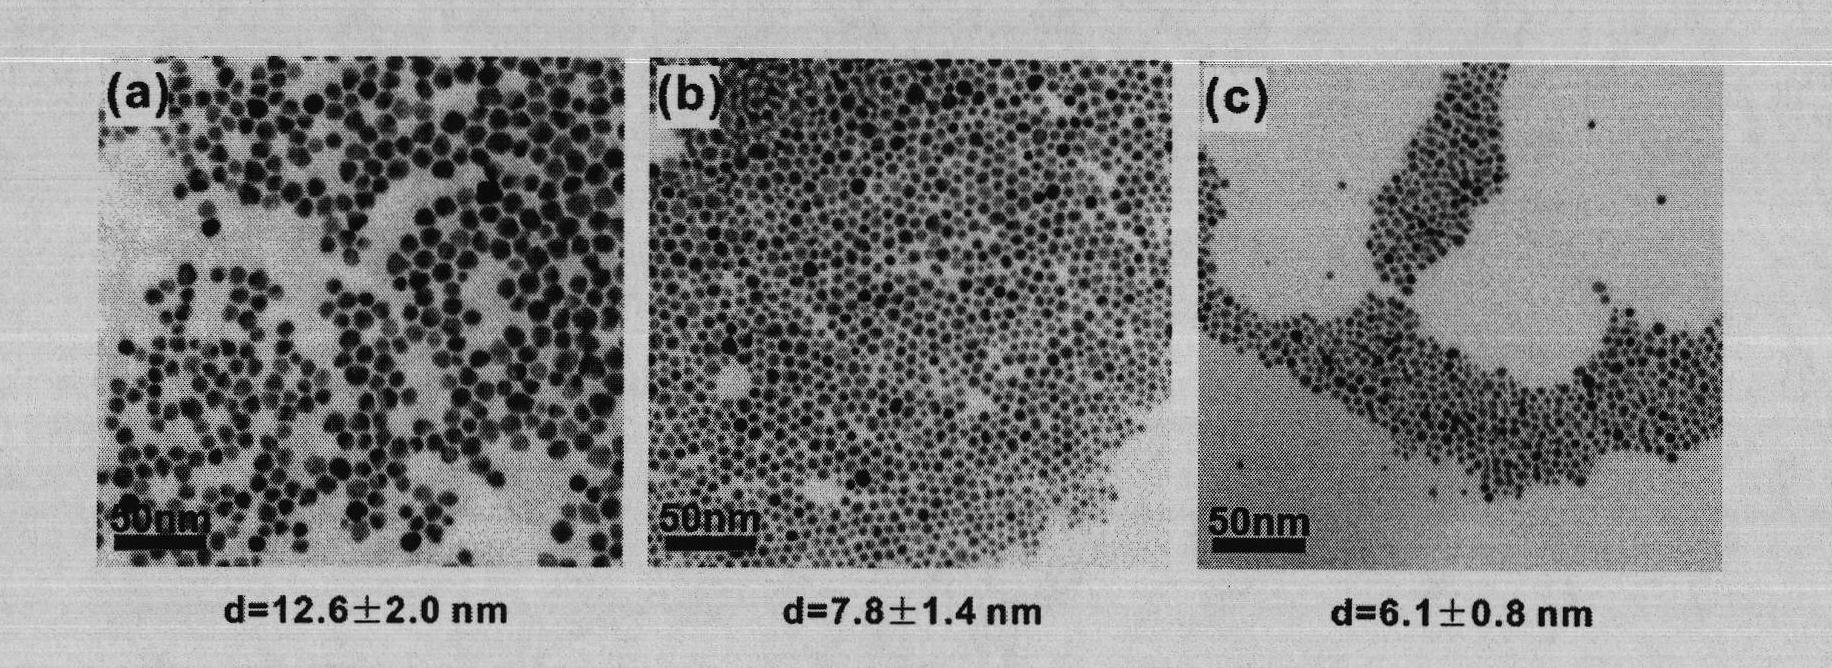 Method for bionically preparing water-soluble gold nanoparticles